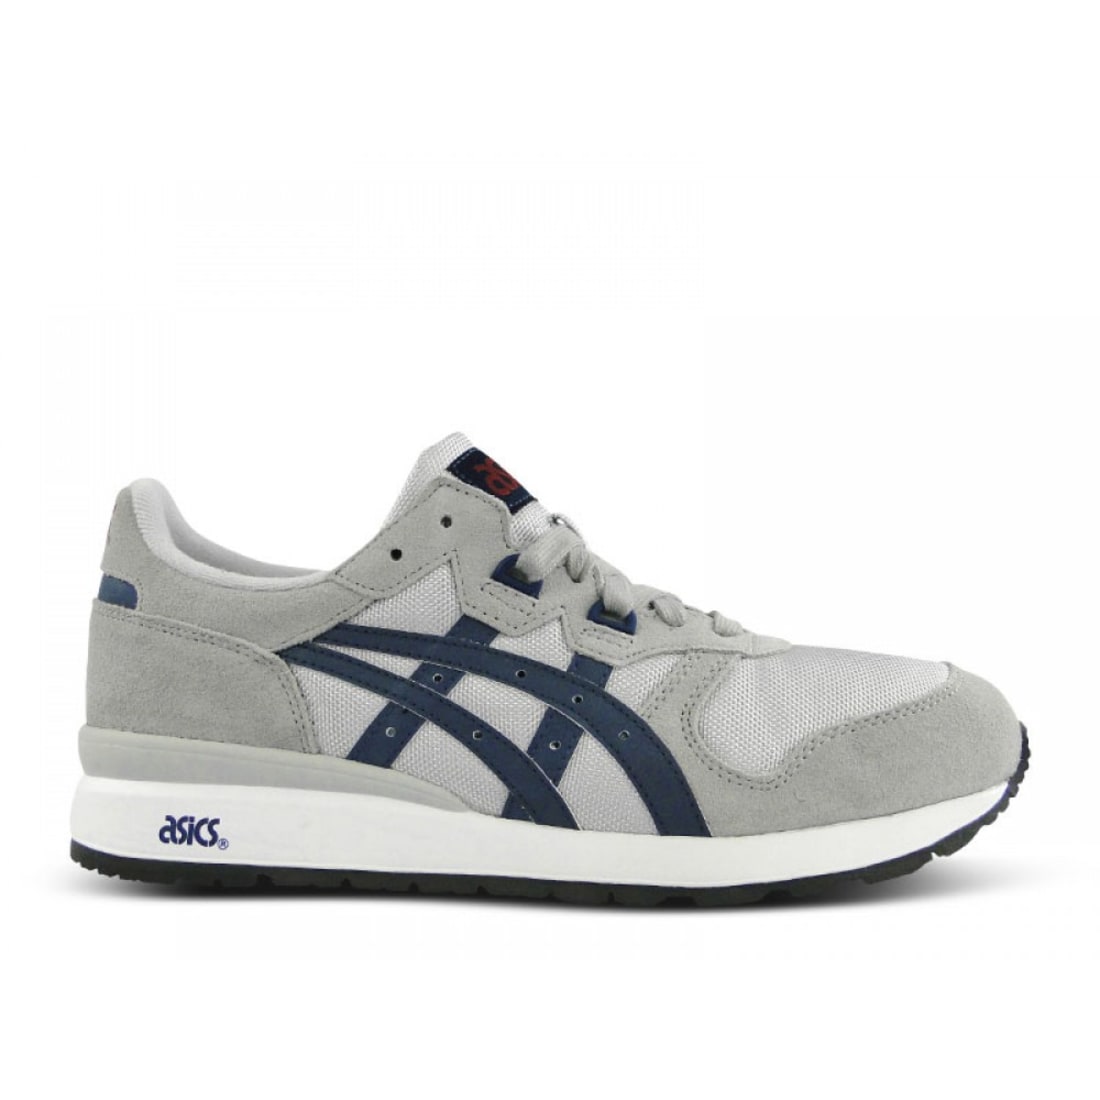 Asics Gel Epirus | ASICS | Sneaker News, Launches, Release Dates, Collabs &  Info